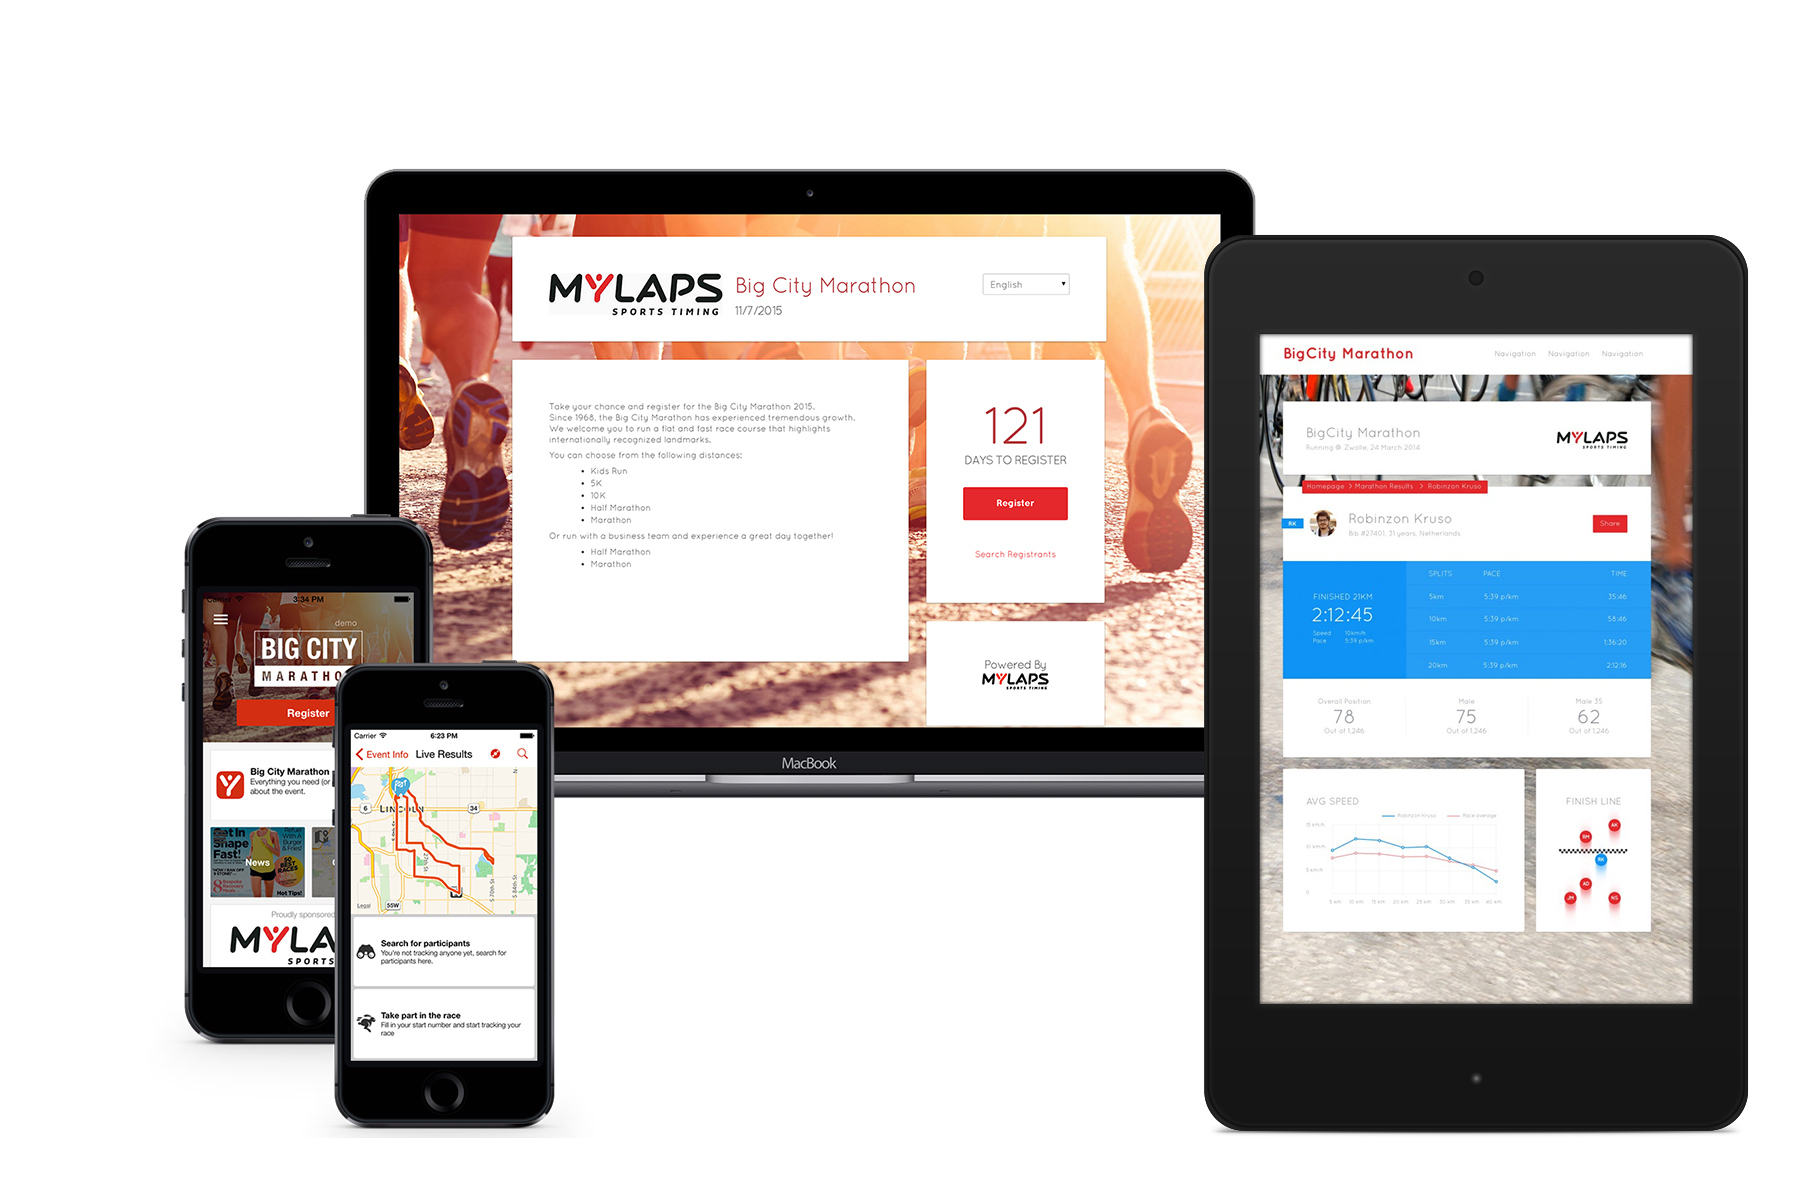 MYLAPS Launches Completely Renewed EventManager | Endurance Sports Wire